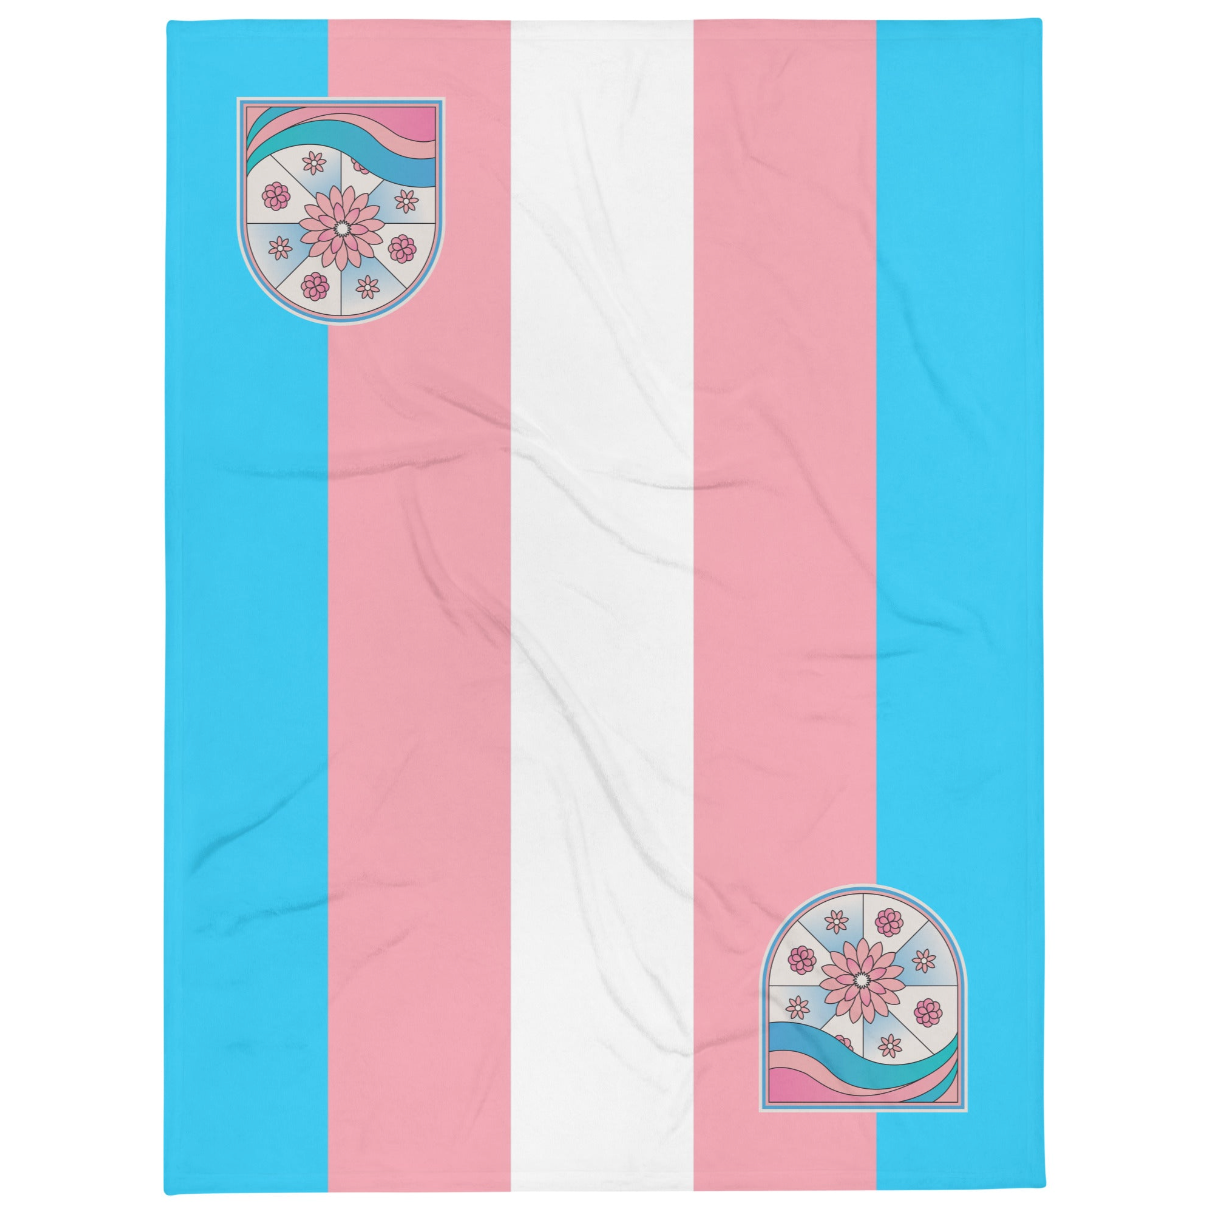 Soft throw blanket. Transgender pride flag colors with beautiful stained glass affect print